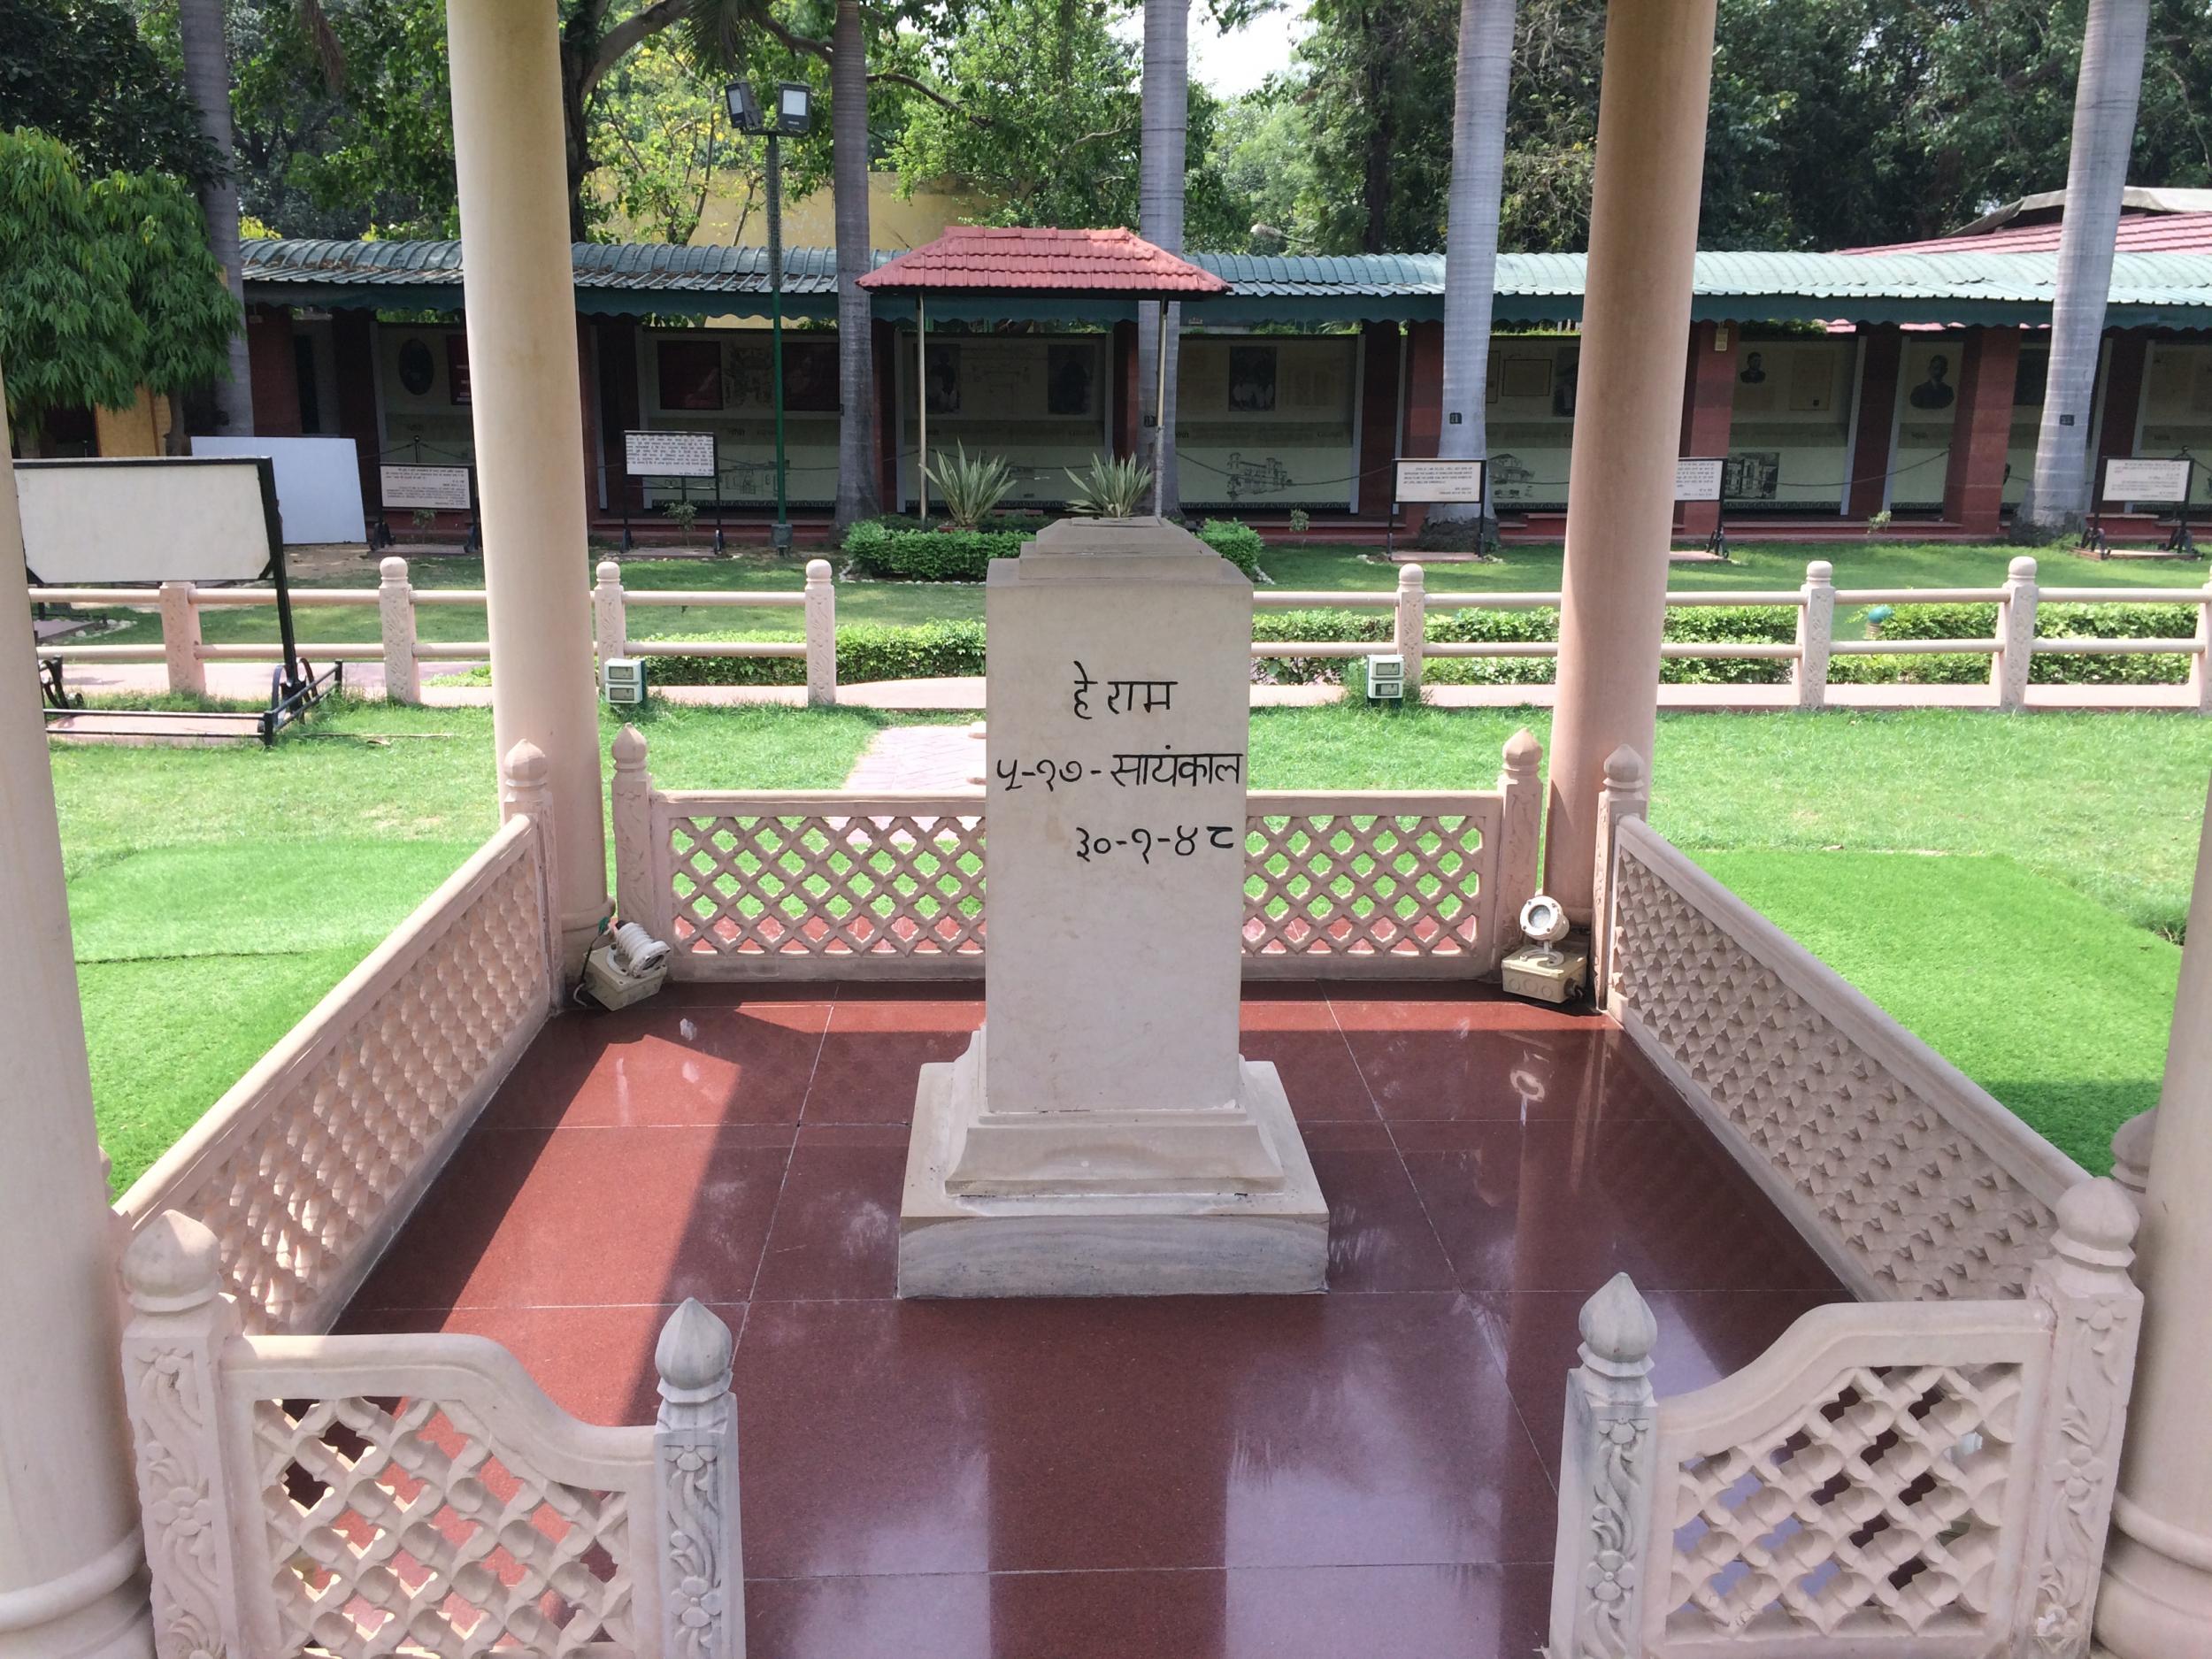 The memorial marking the spot where Gandhi was assassinated (iStock)